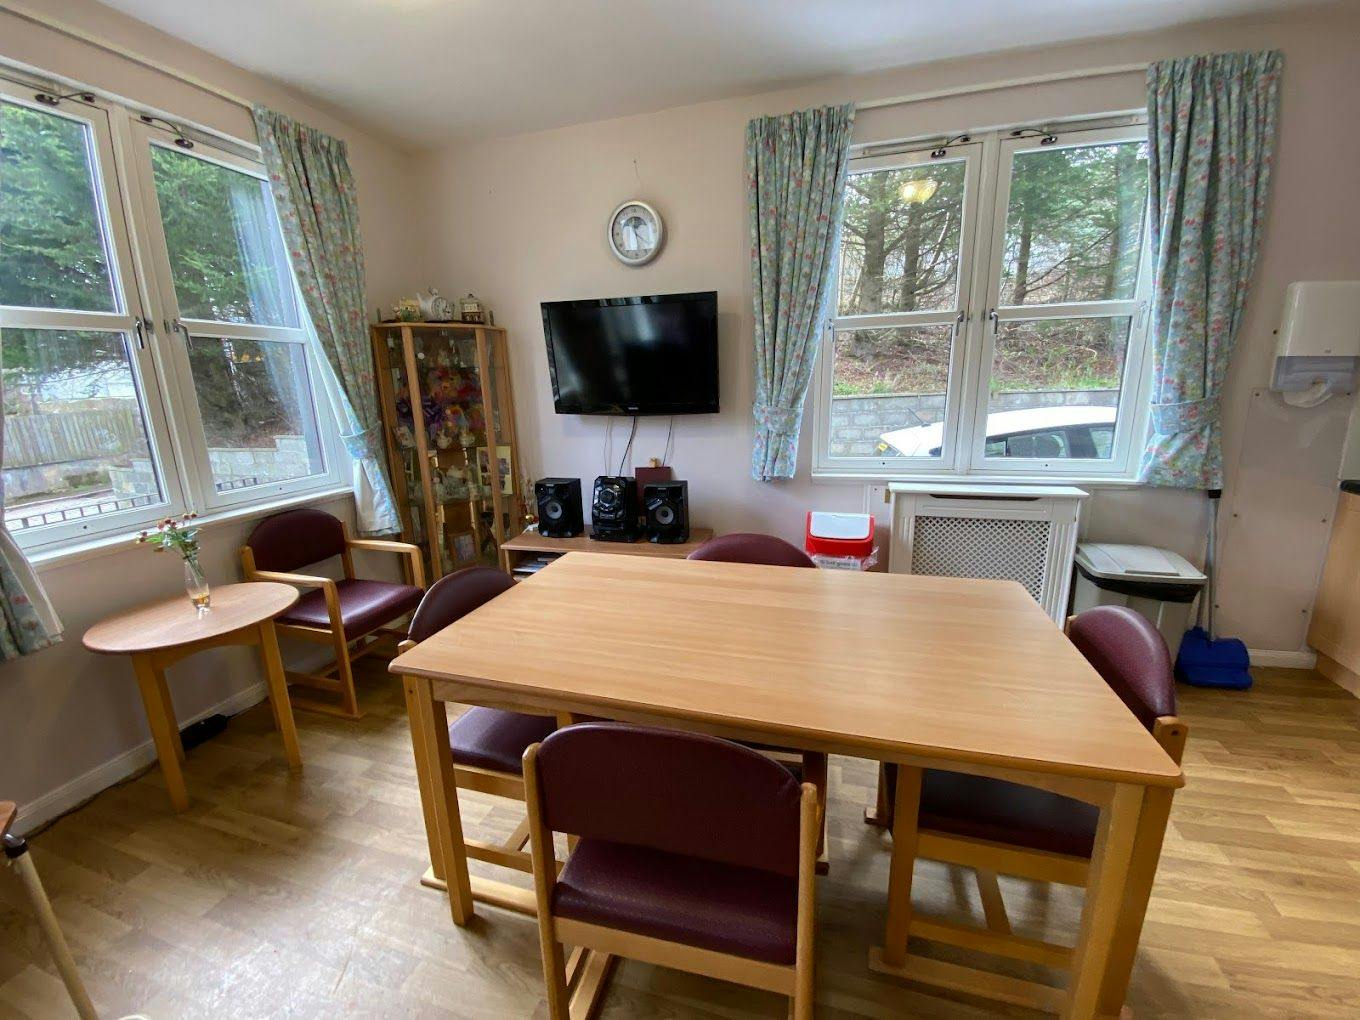 Independent Care Home - Laurels Lodge care home 5